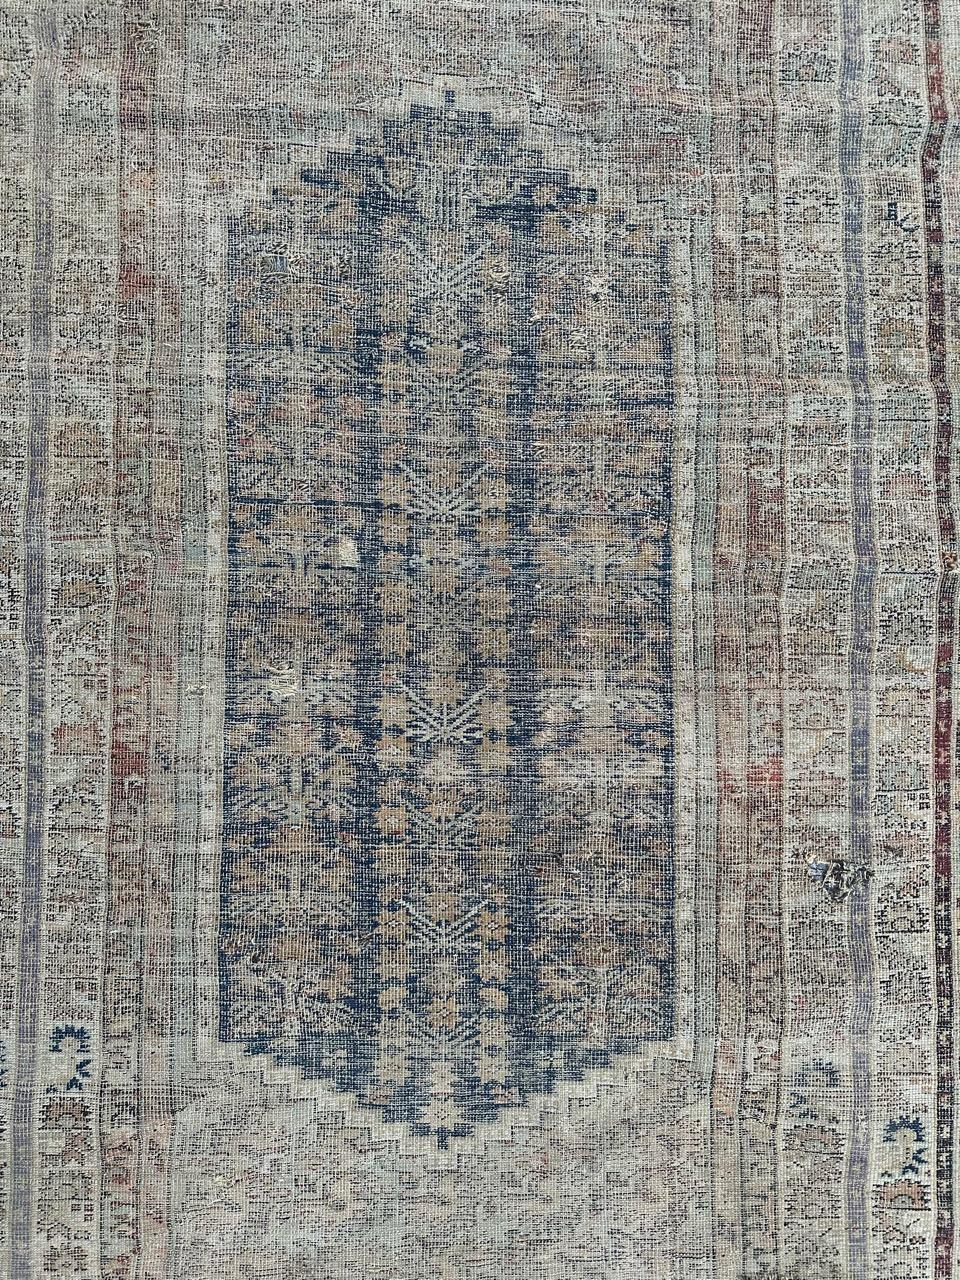 Exquisite distressed 18th-century Turkish Koula antique rug, meticulously handwoven with wool-on-wool craftsmanship. This exceptionally rare piece, though showing signs of age and wear, features a decorative design with stylized flower motifs on a